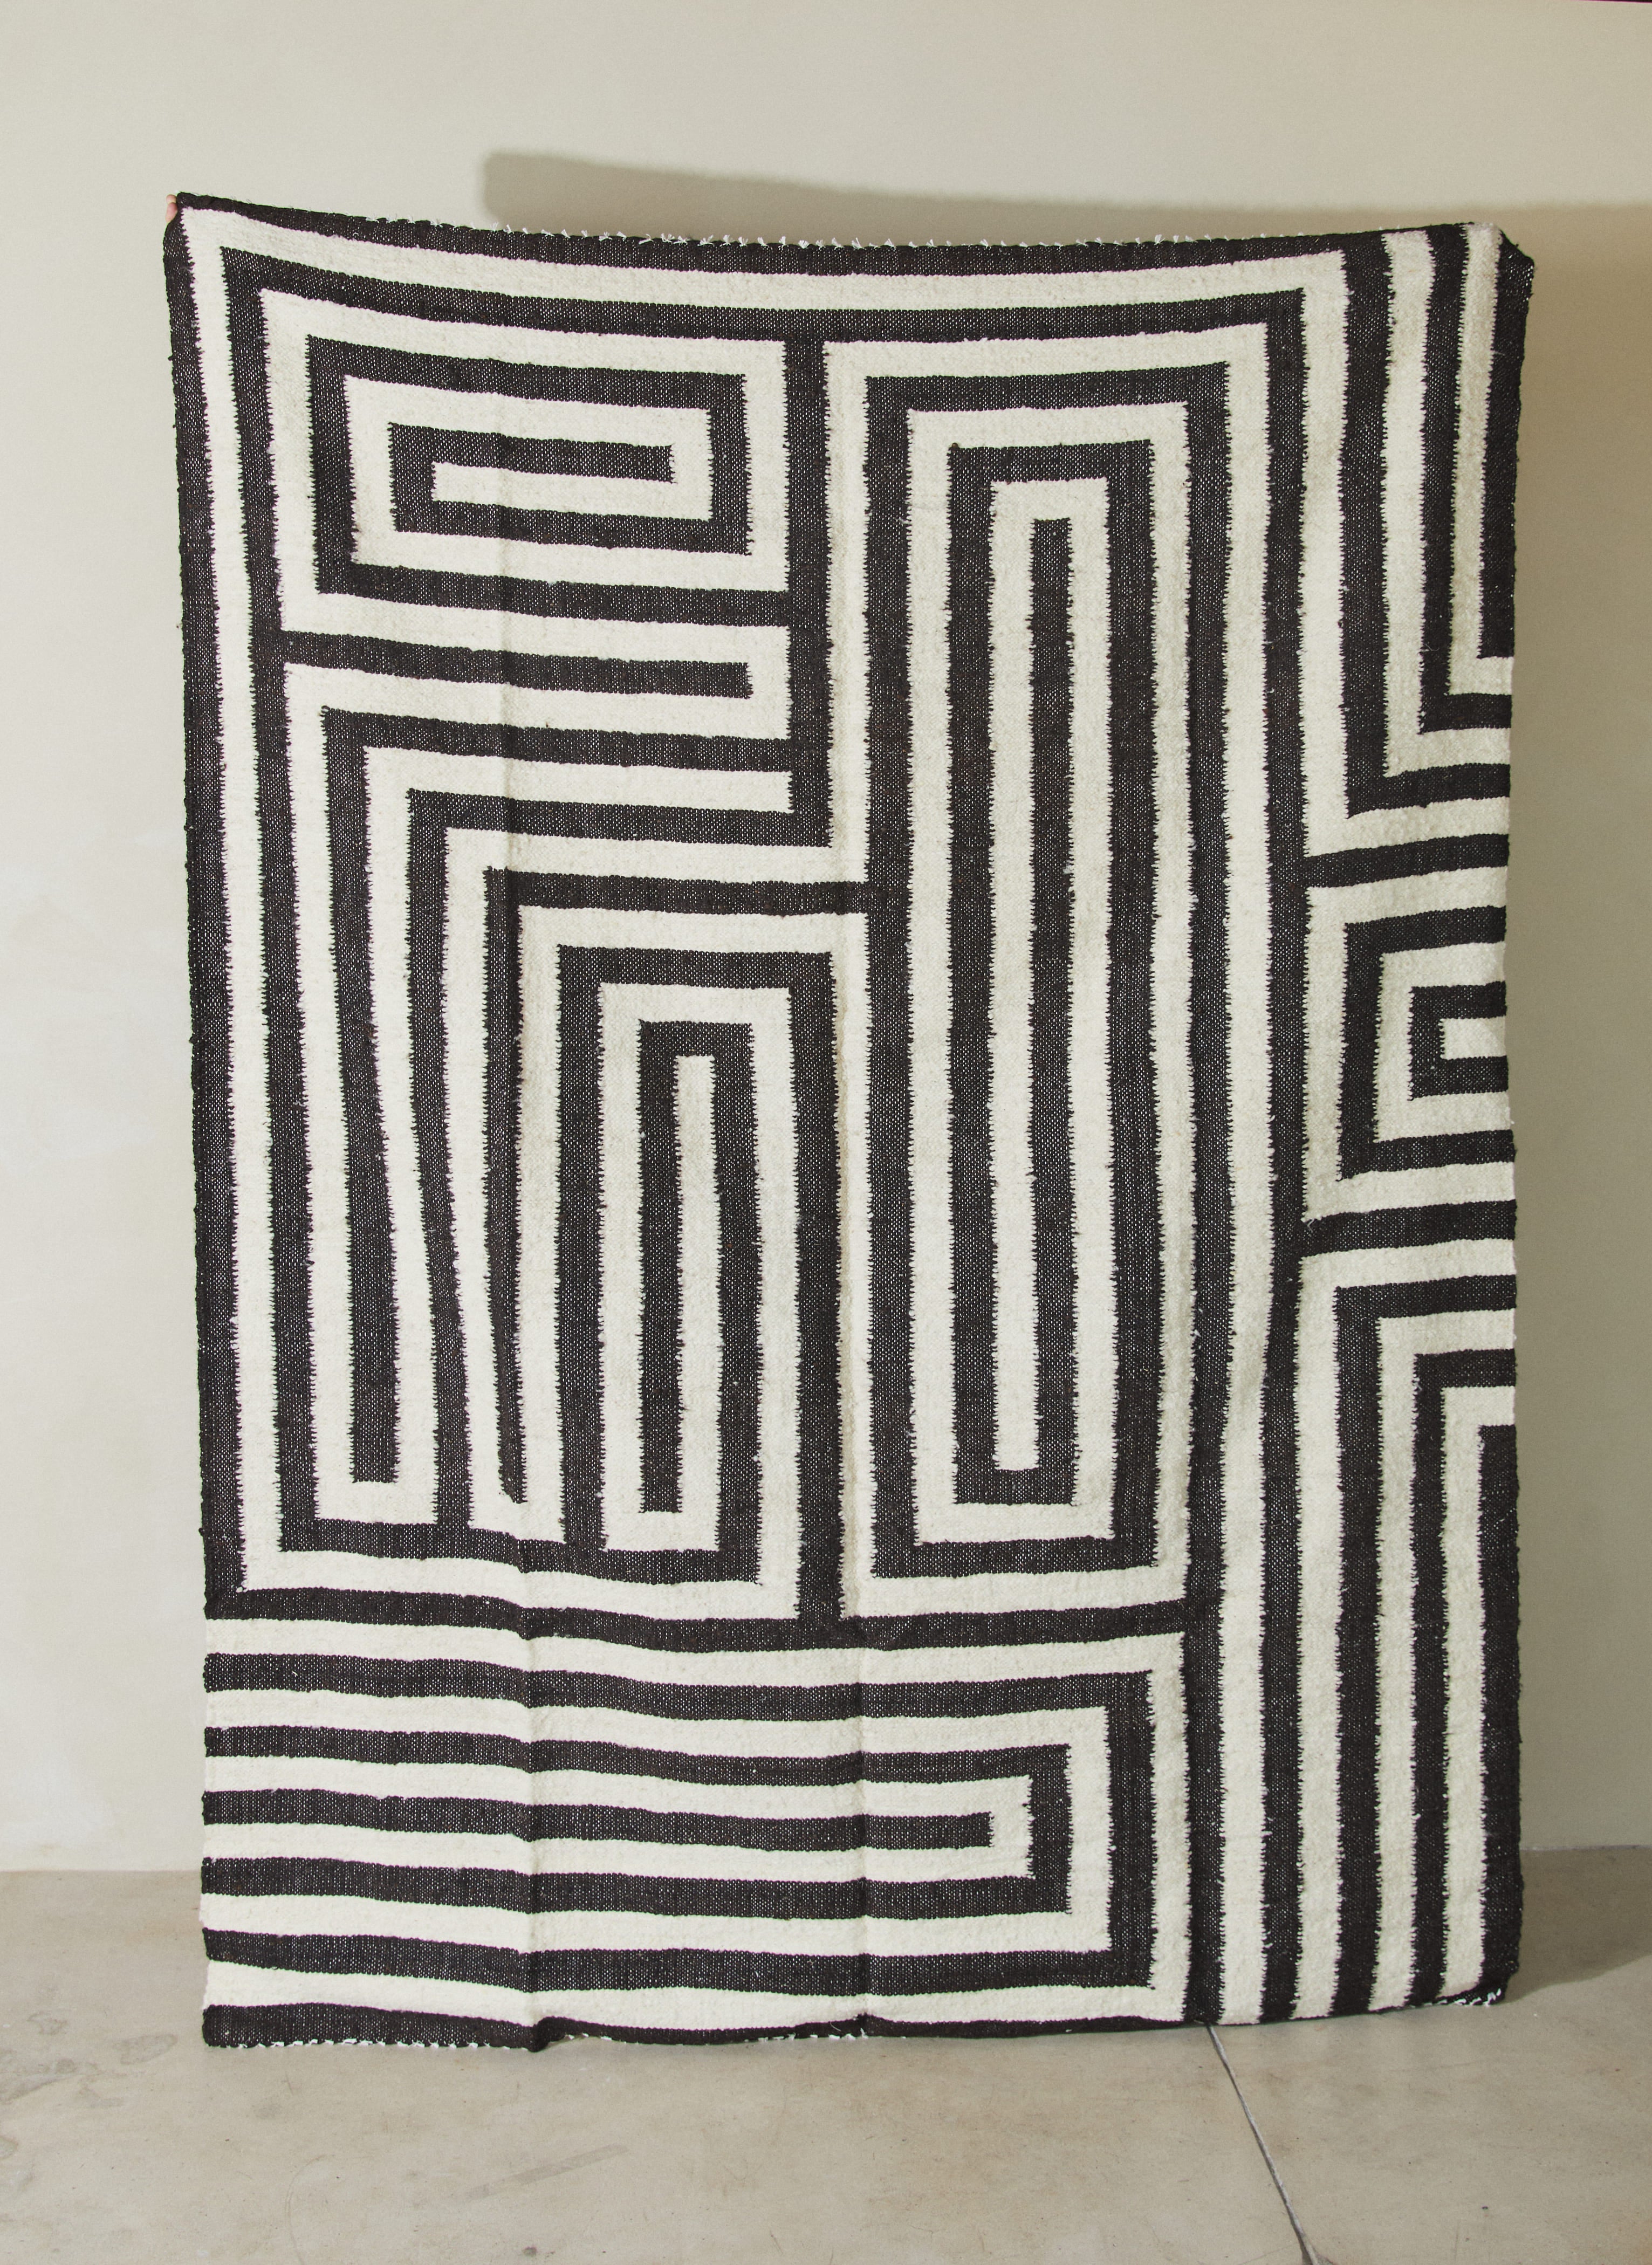 Laberinto Black. Rare find. Large, geometric area rug made of 100% hand-spun sheep wool with an abstract design reminiscent of a labyrinth. 